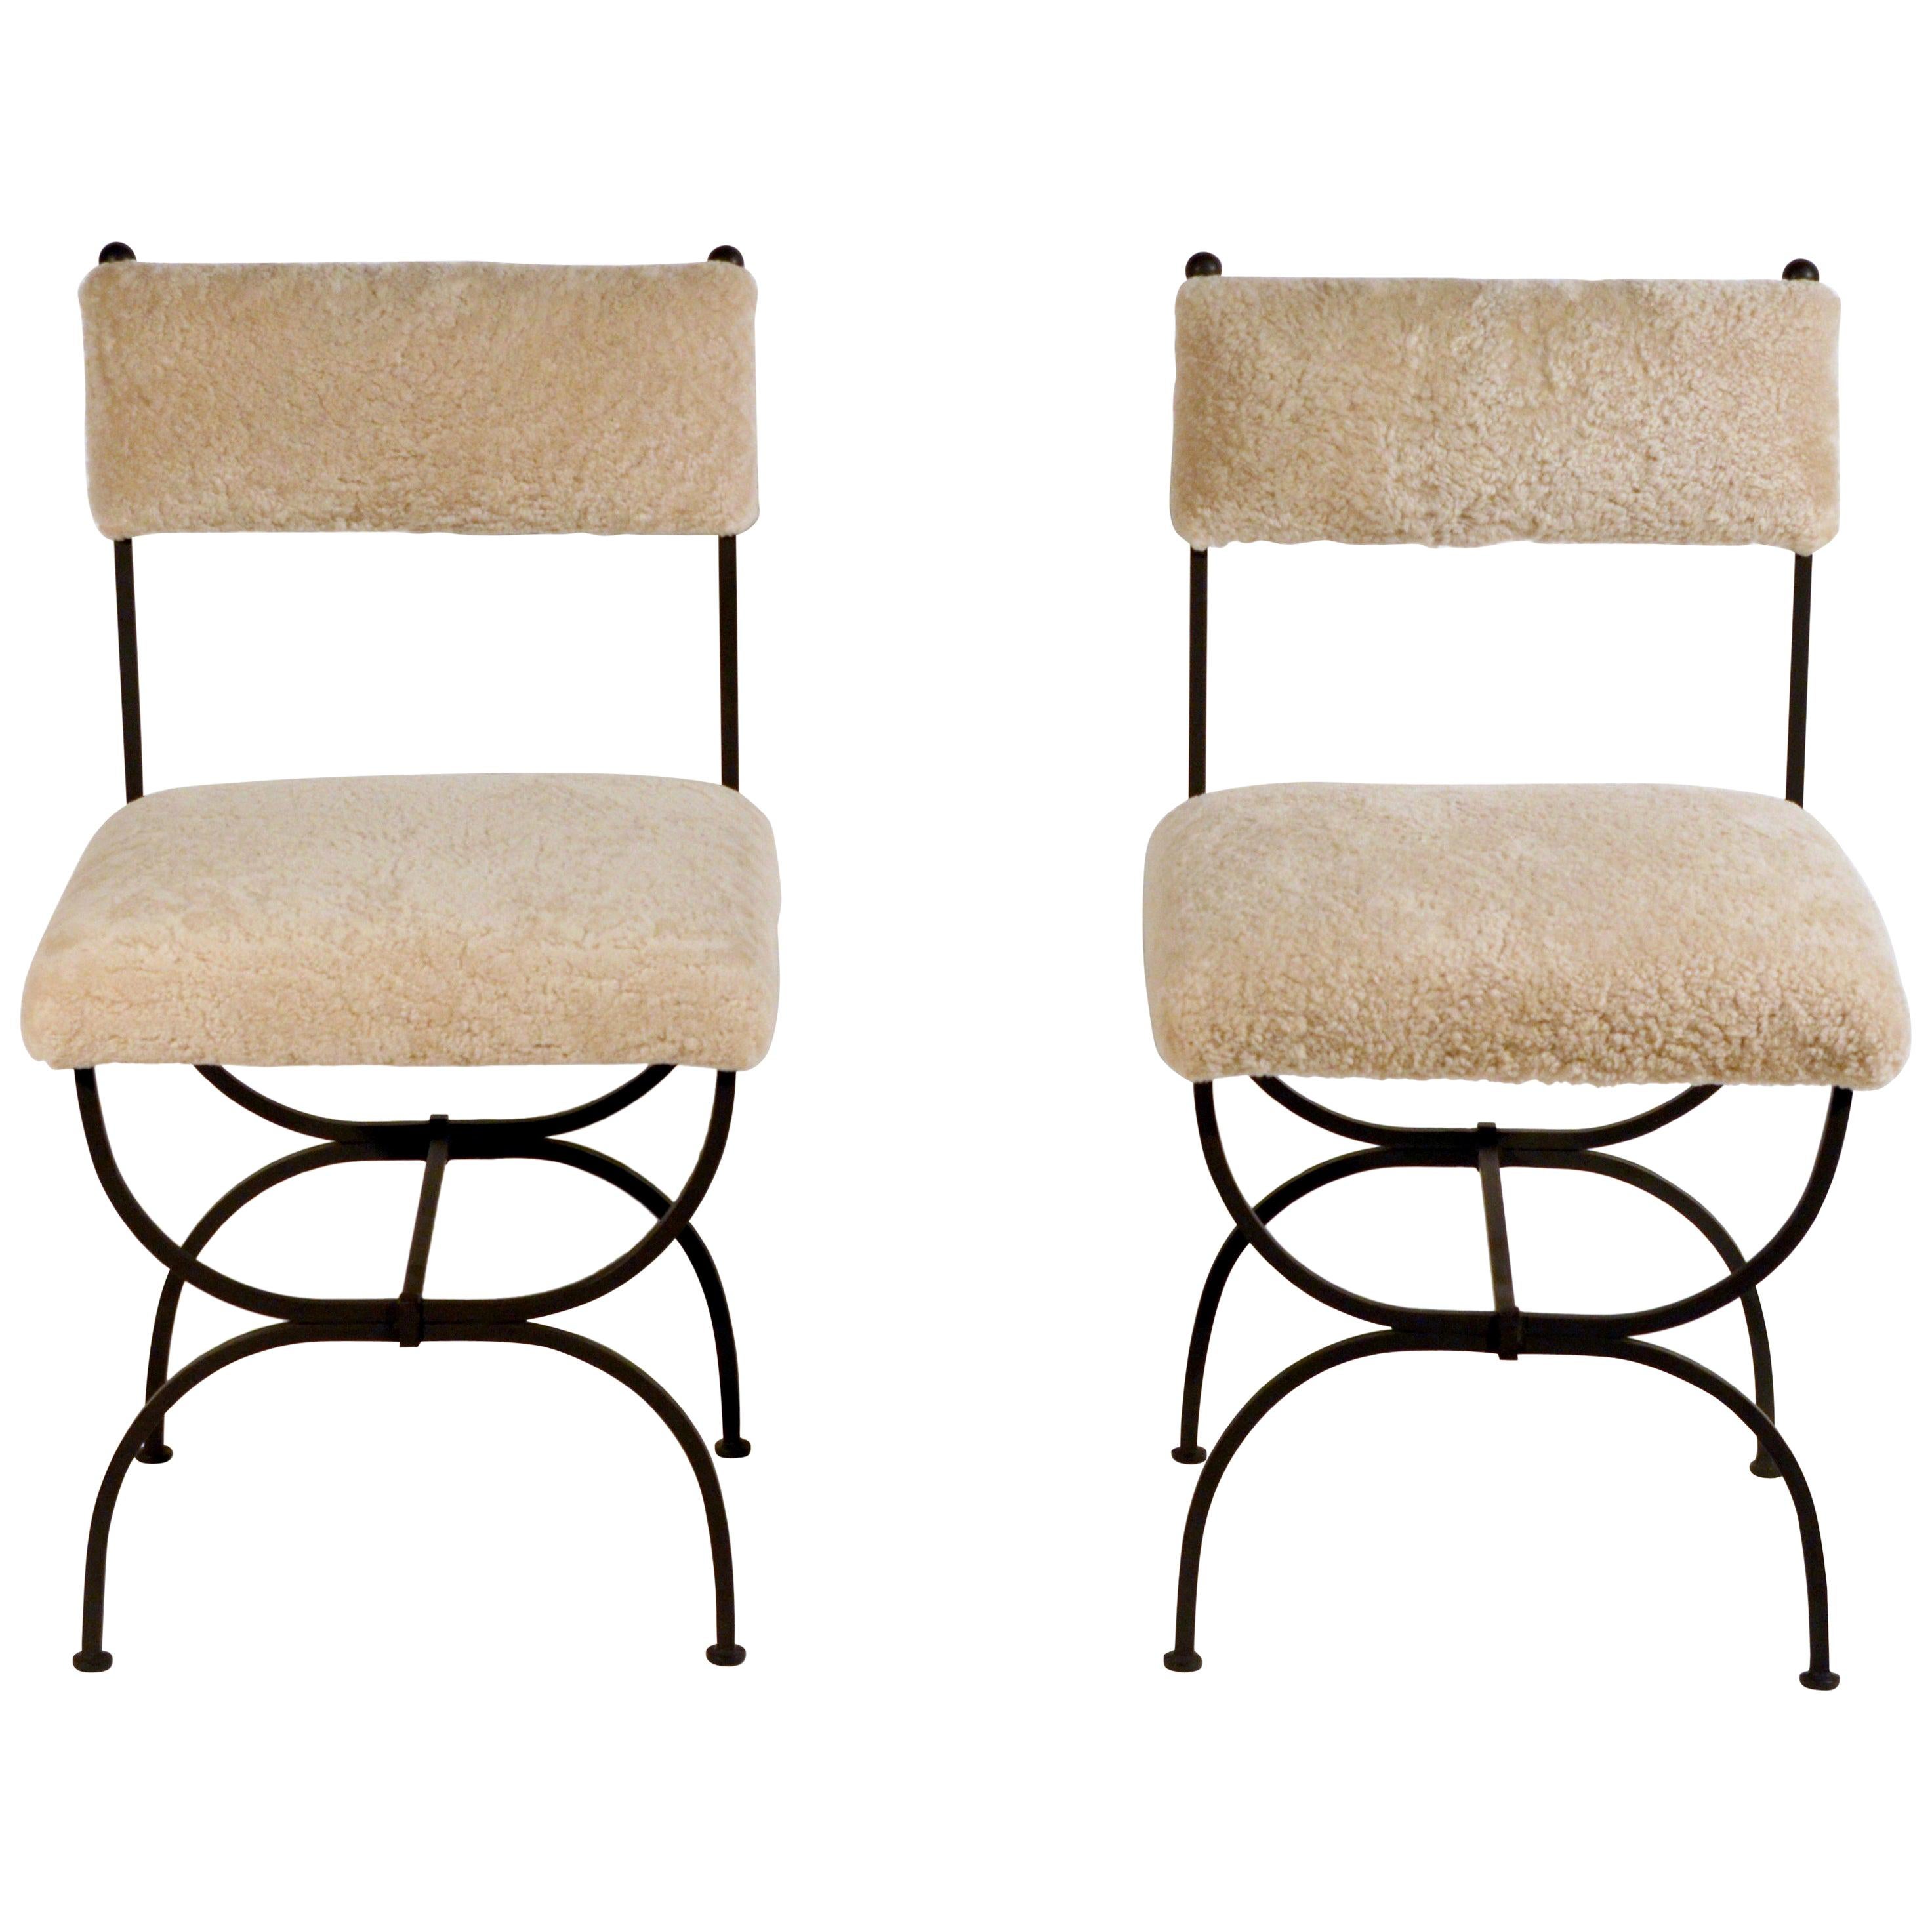 Pair of Chic 'Arcade' Wrought Iron and Shearling Chairs by Design Frères